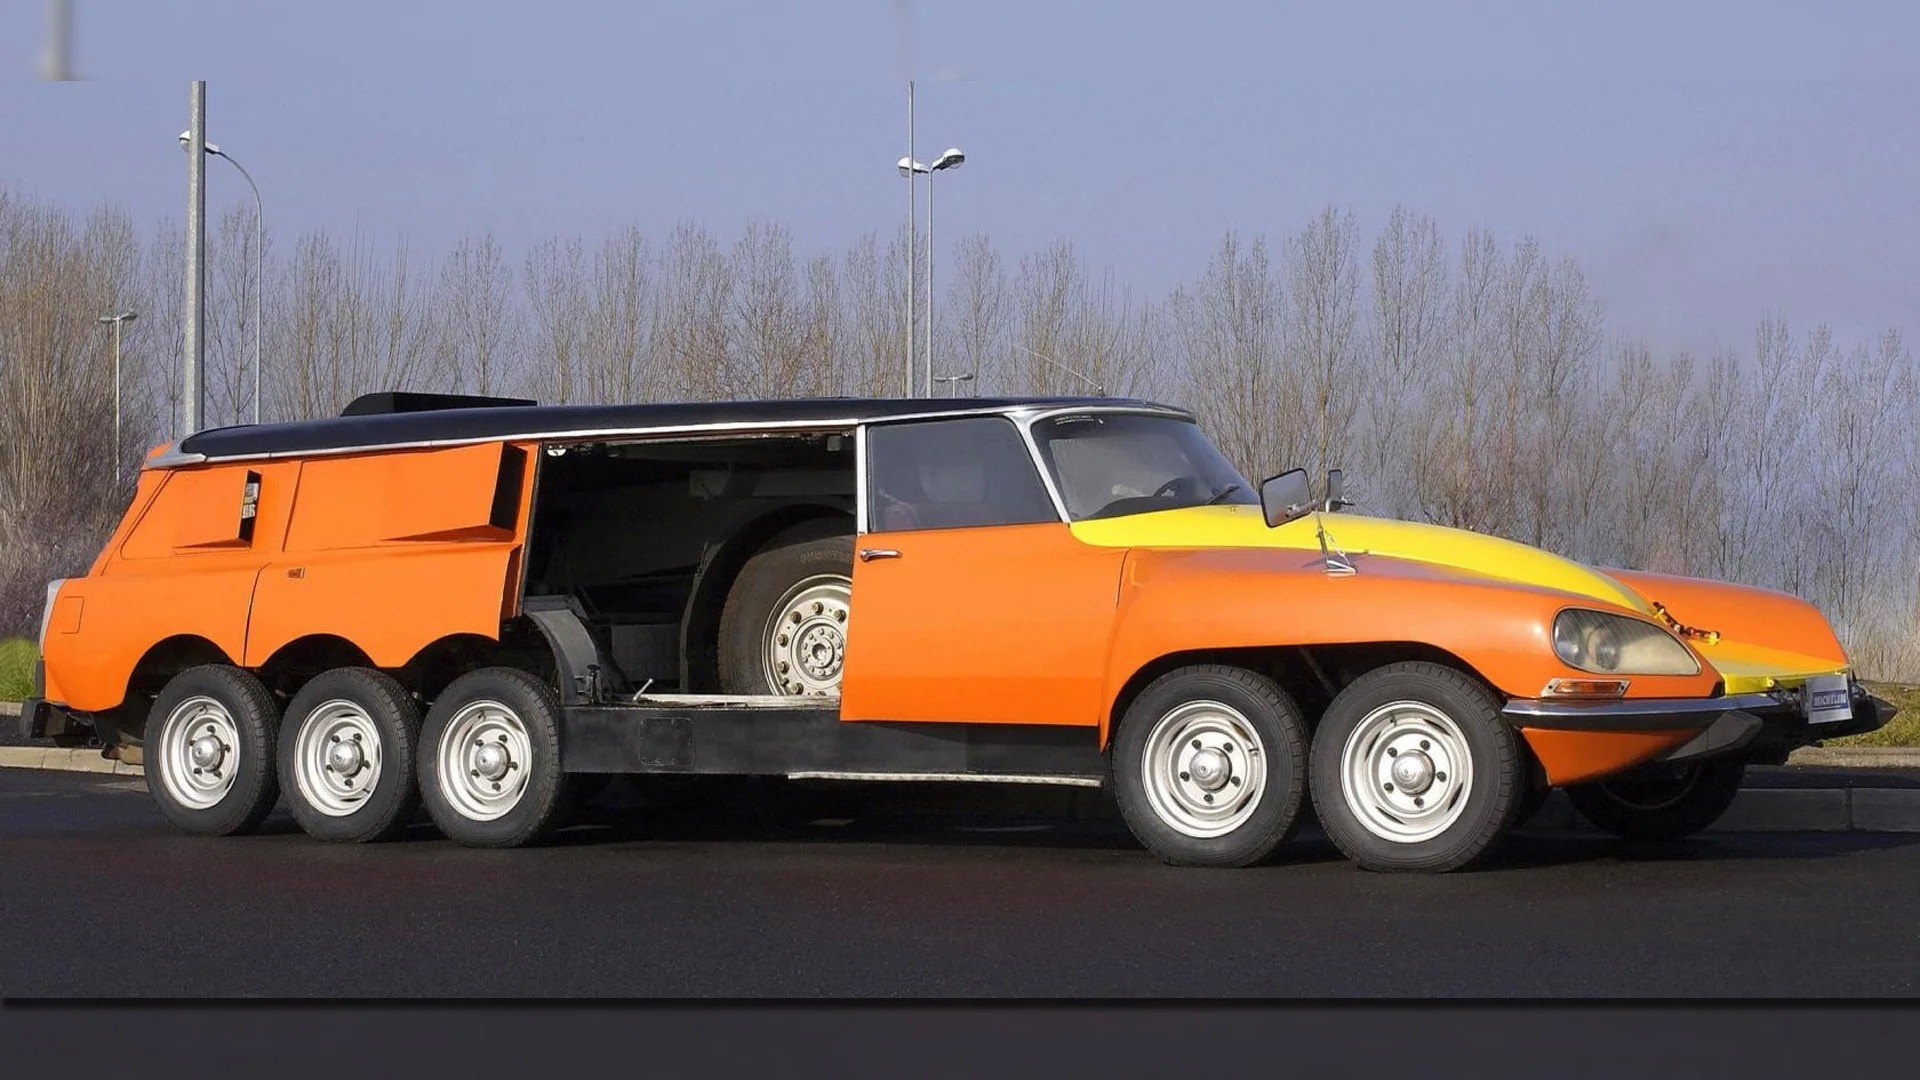 french-freak-citroen-plr-by-michelin-was-a-10-wheeled-monster-built-to-test-truck-tires_1.jpg